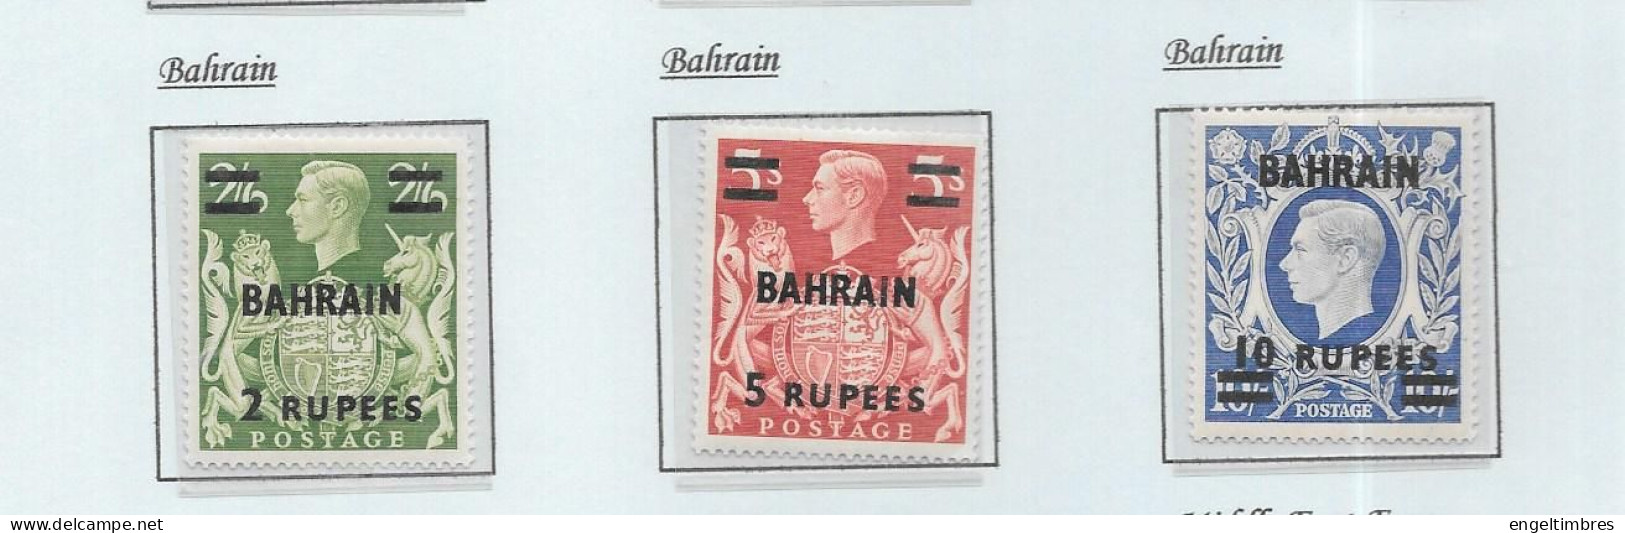 GB George Vl -   "ARMS"  BAHRAIN   -  High Values (3)  Light Hinging - See Scans - Unused Stamps